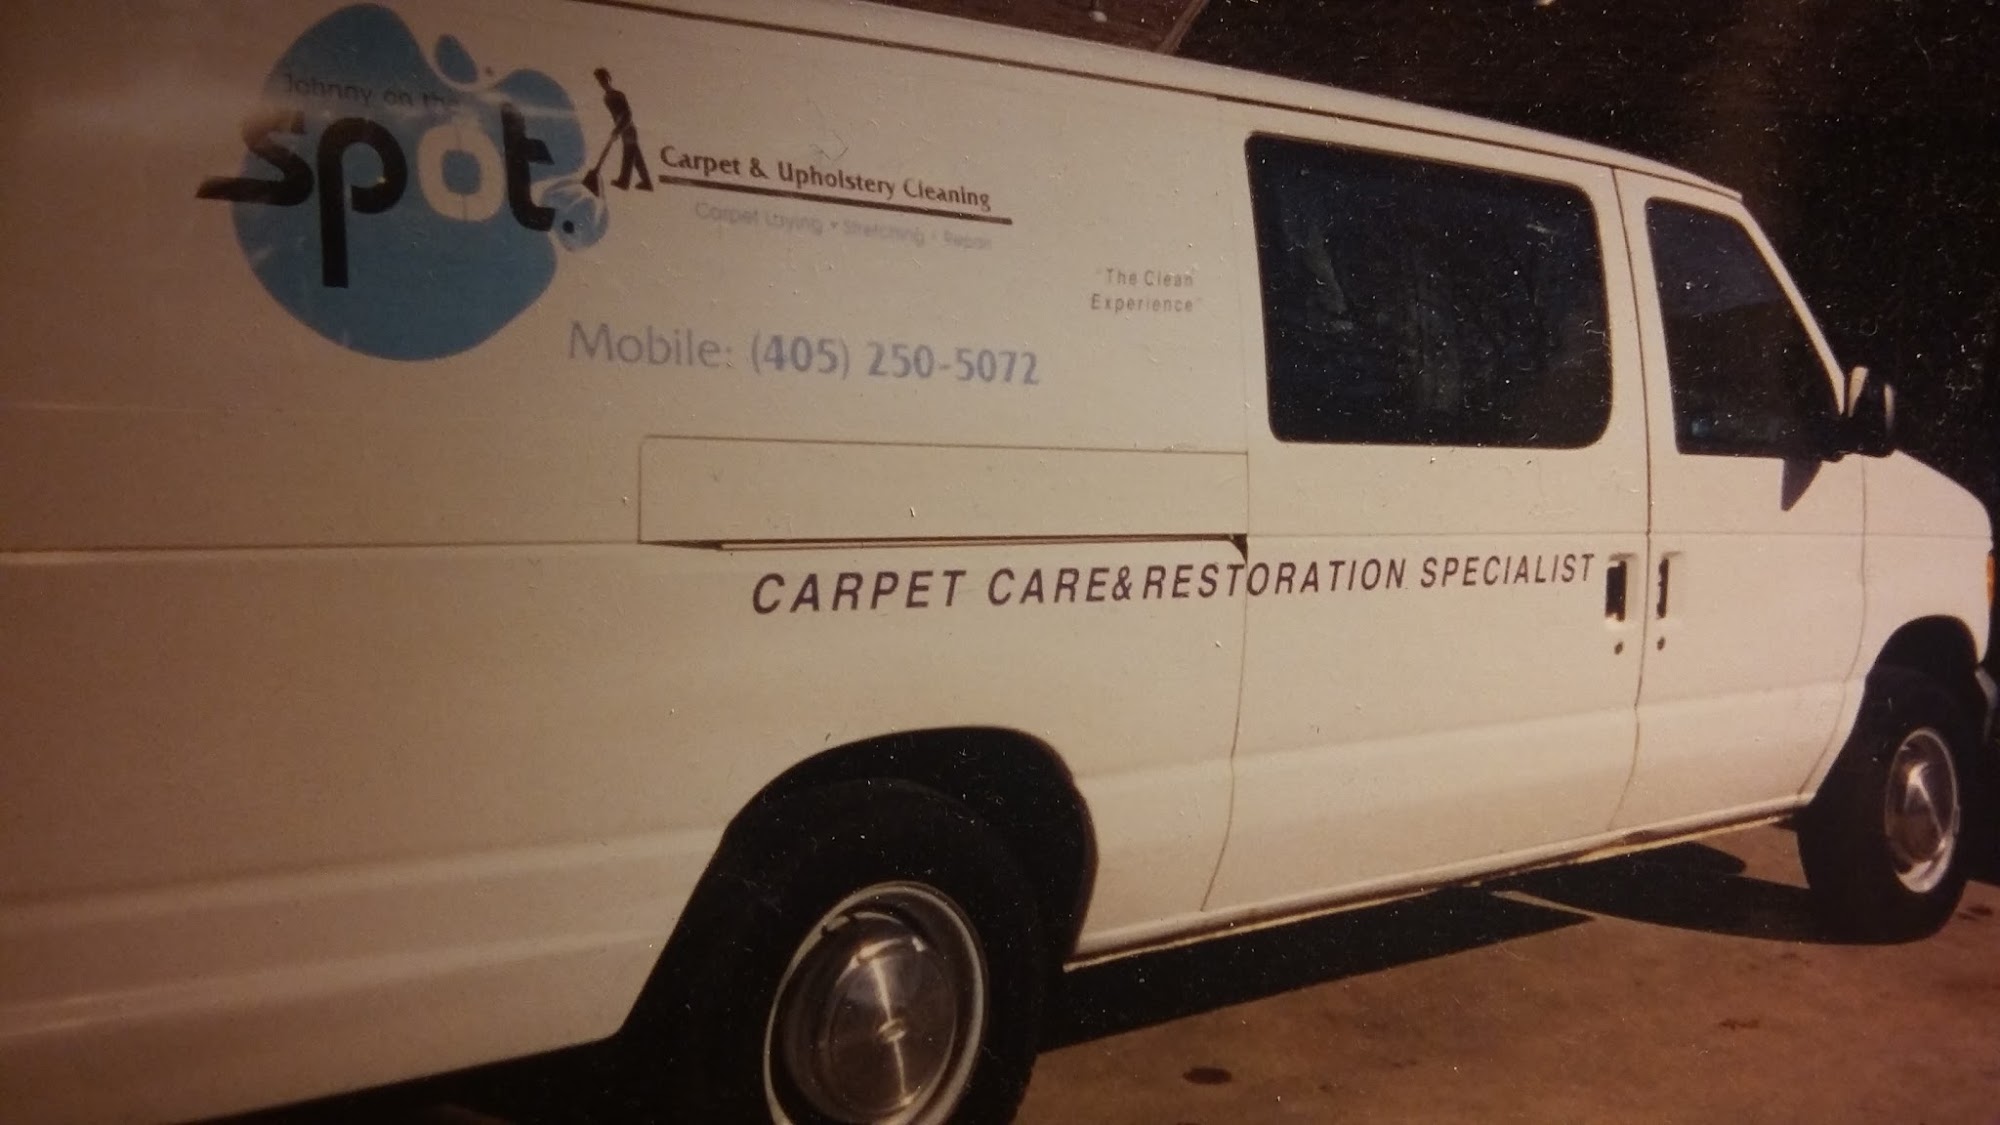 Johnny On the Spot Carpet & Upholstery Cleaning